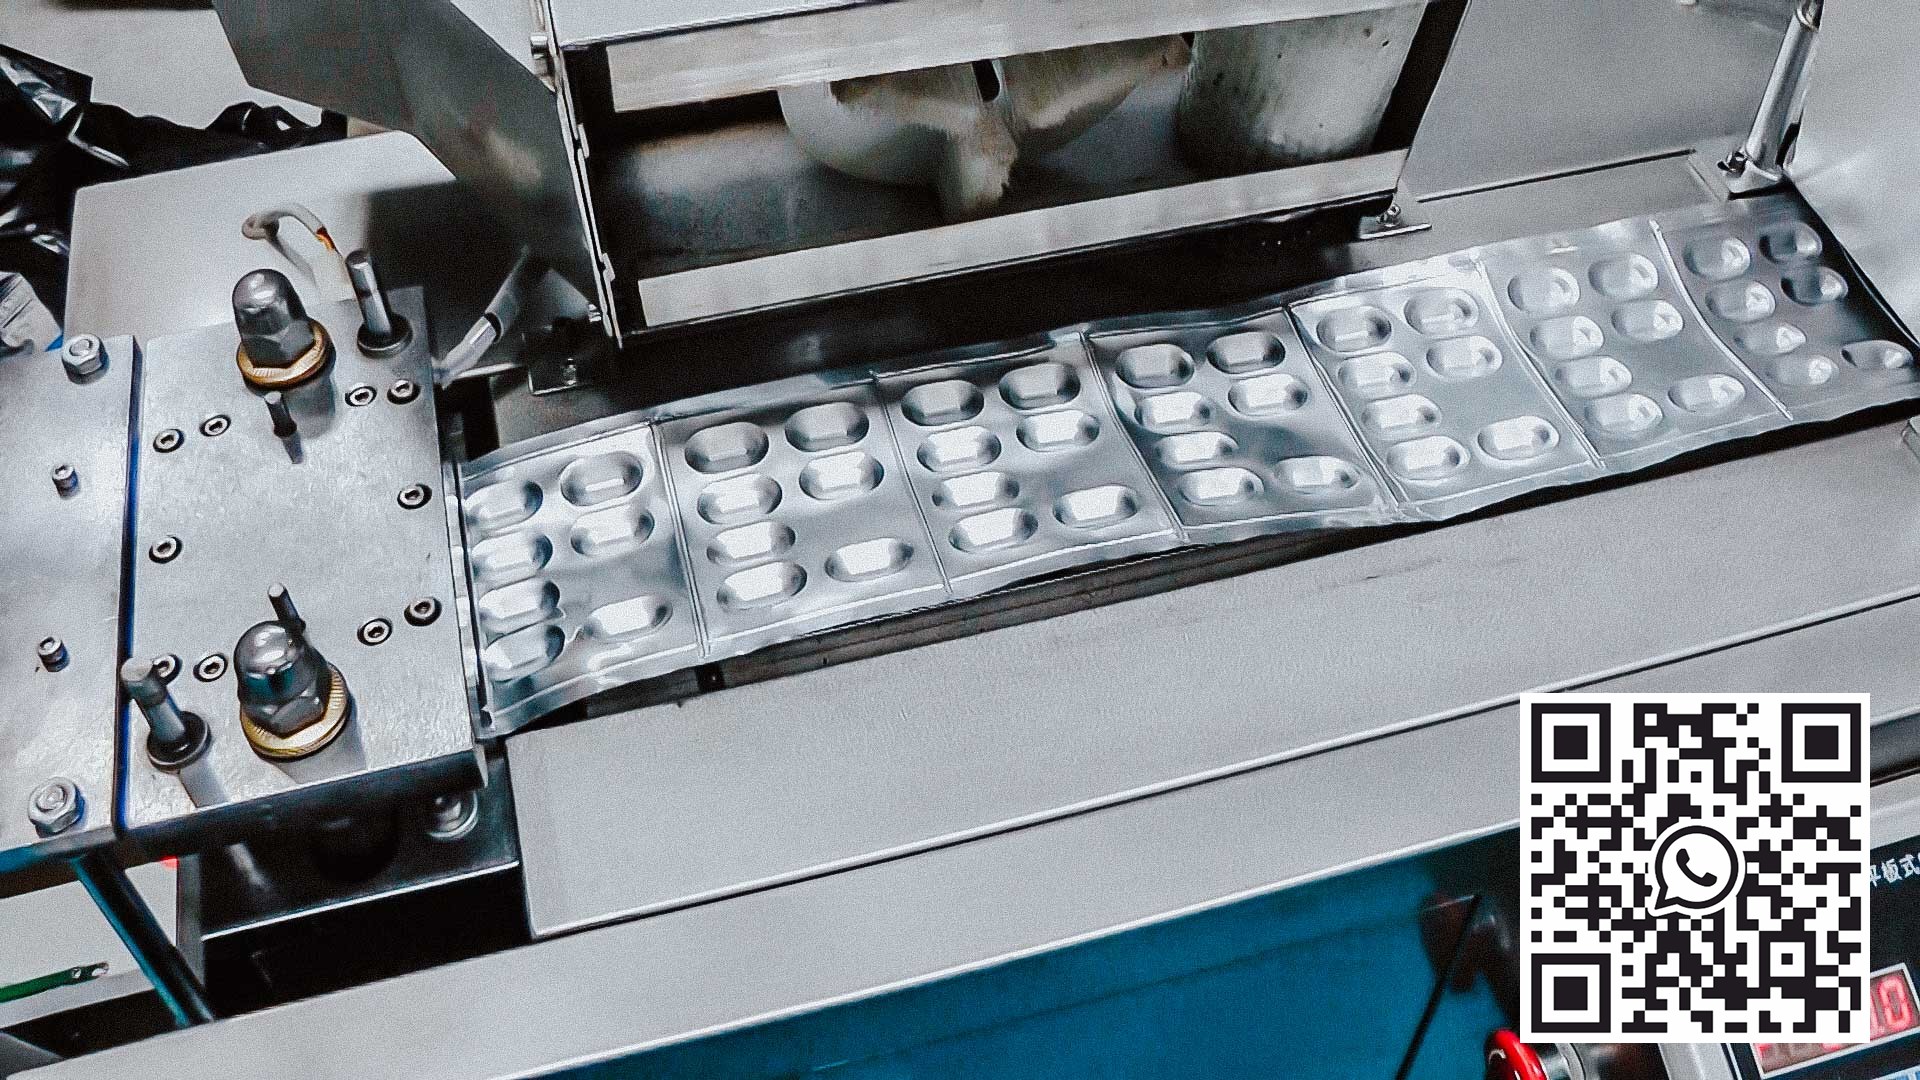 Equipment for packaging gelatin capsules and tablets in aluminum blisters